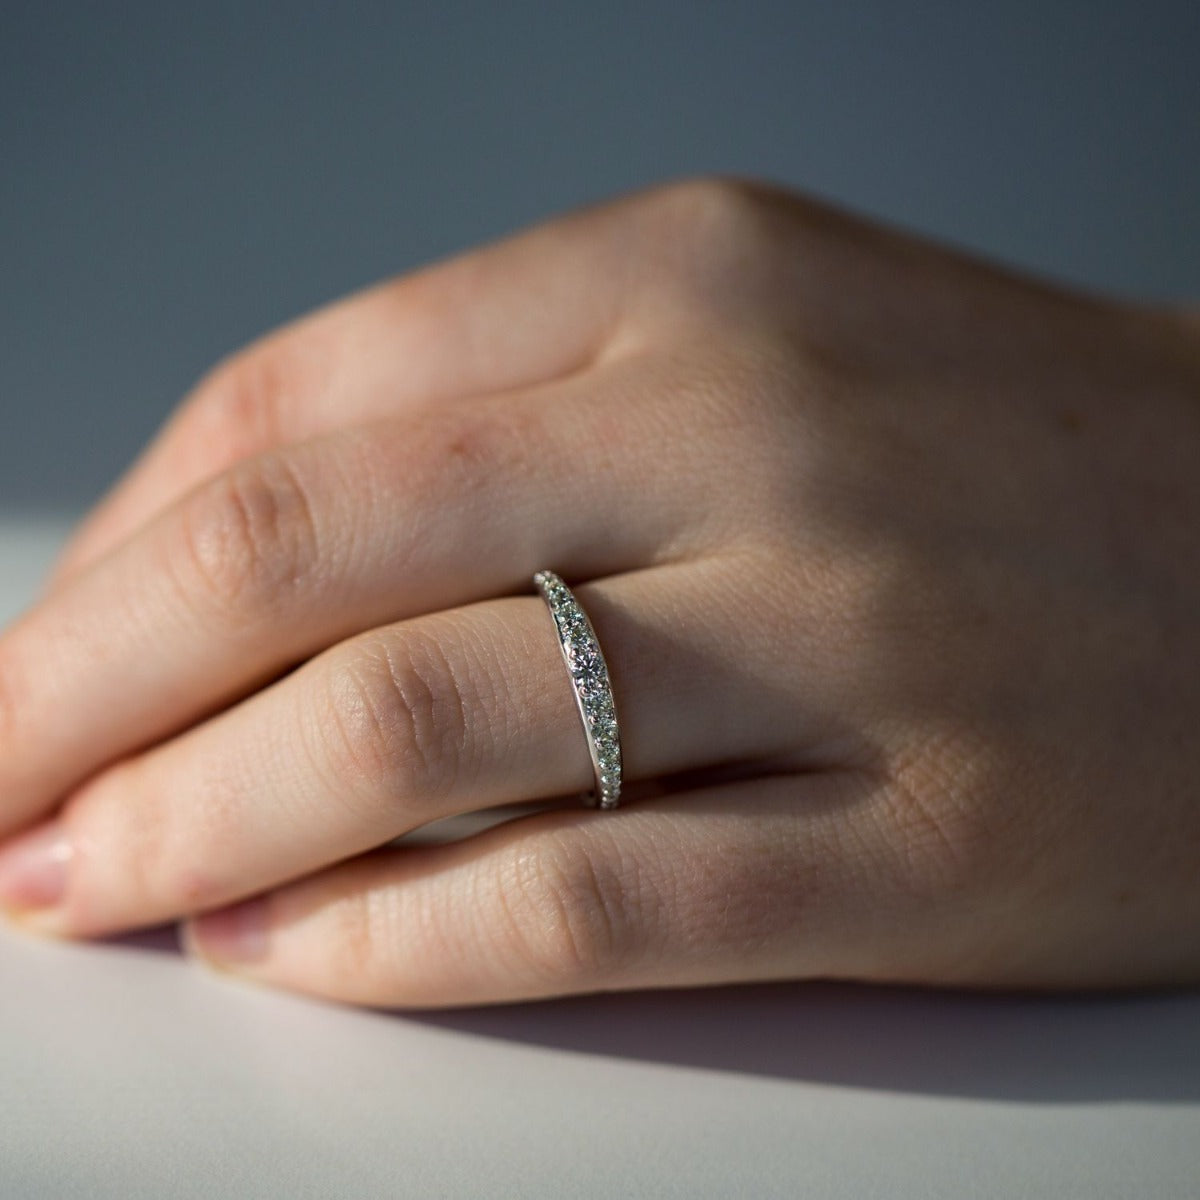 10 Stellar Diamond Solitaire Rings You Can Buy For Your Boo